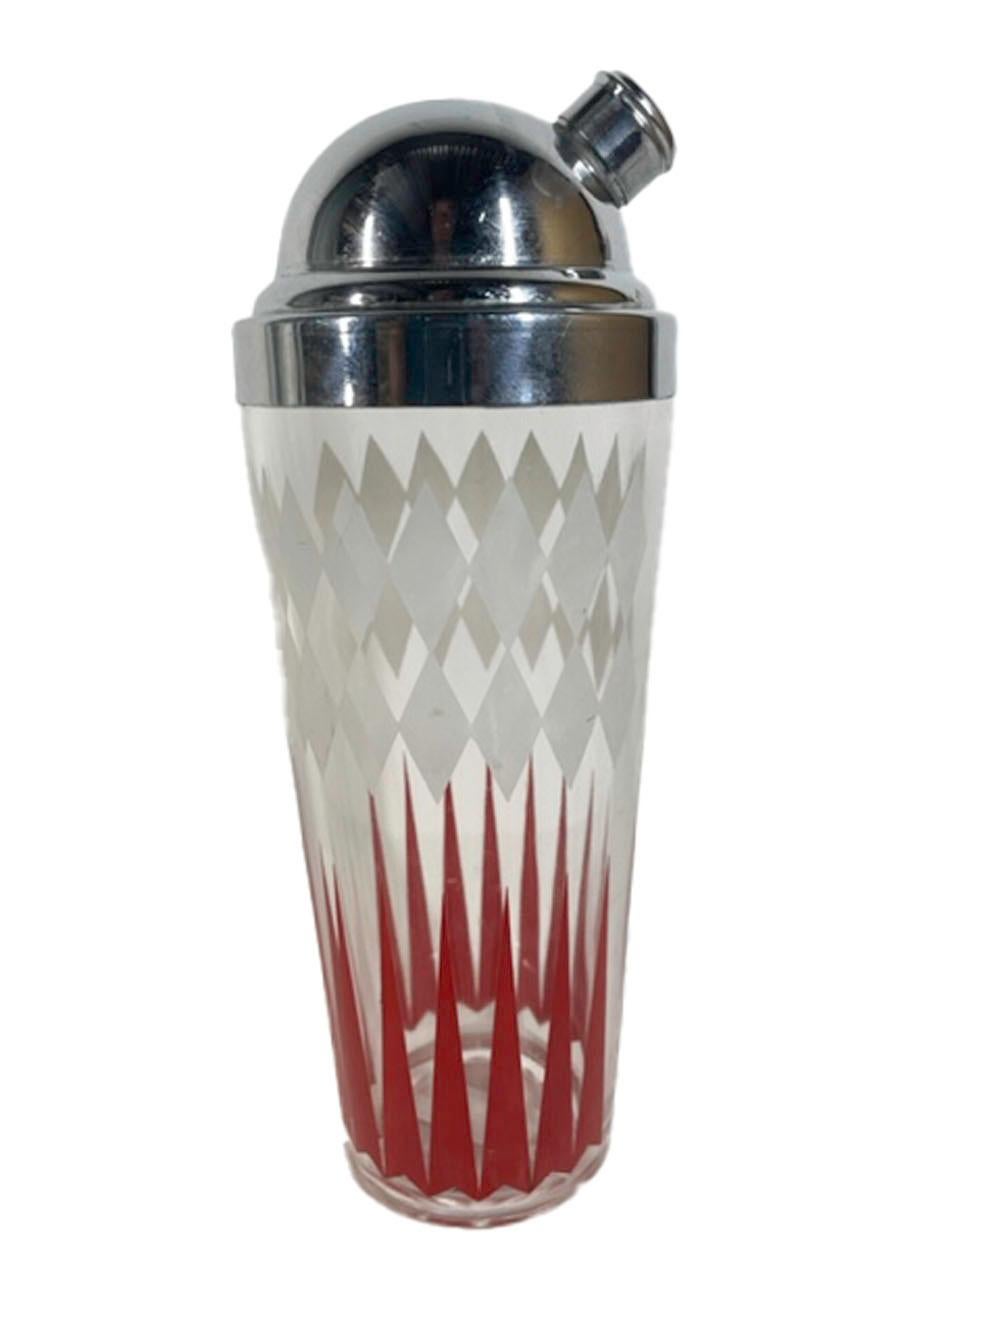 American Art Deco Cocktail Shaker with White Diamonds over Red Arrows